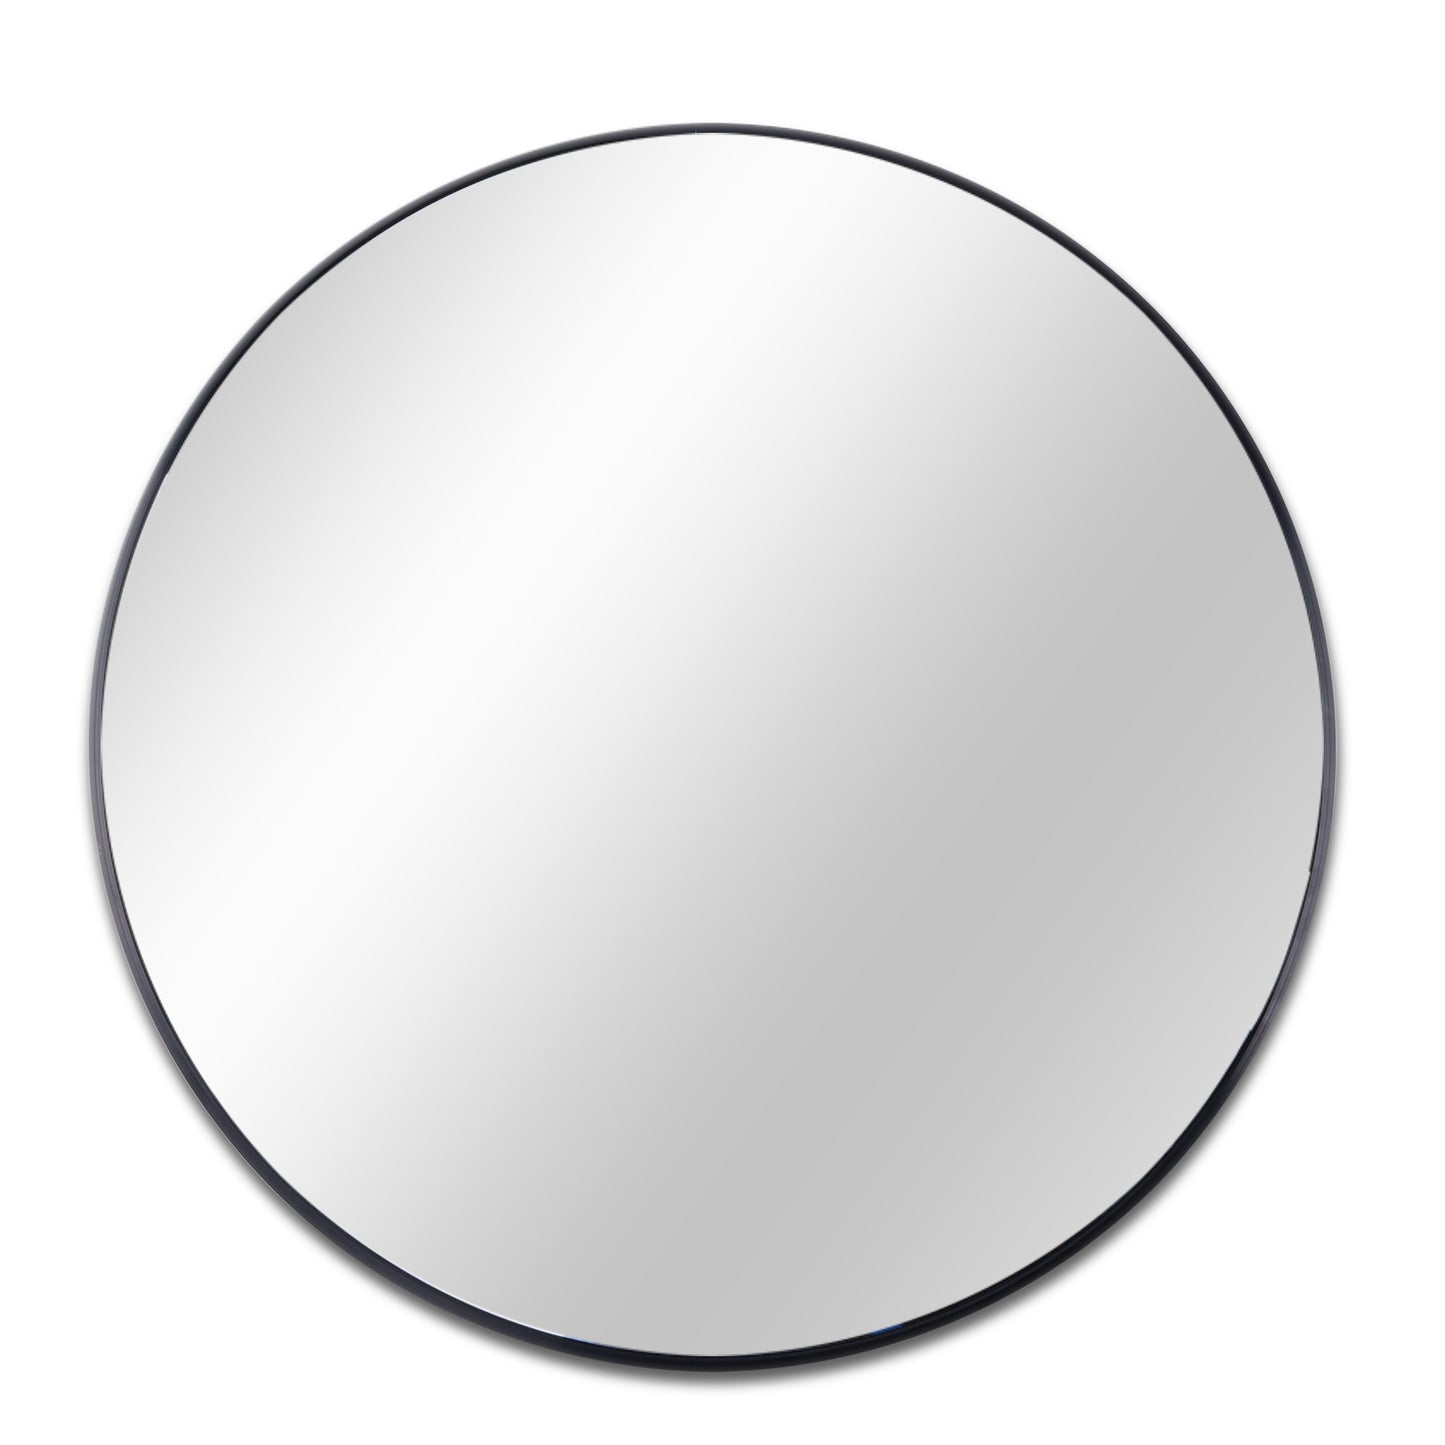 Round Mirror, Circle Mirror 16 Inch, Black Round Wall Mirror Suitable for Bedroom, Living Room, Bathroom, Entryway Wall Decor and More, Brushed Aluminum Frame Large Circle Mirrors for Wall